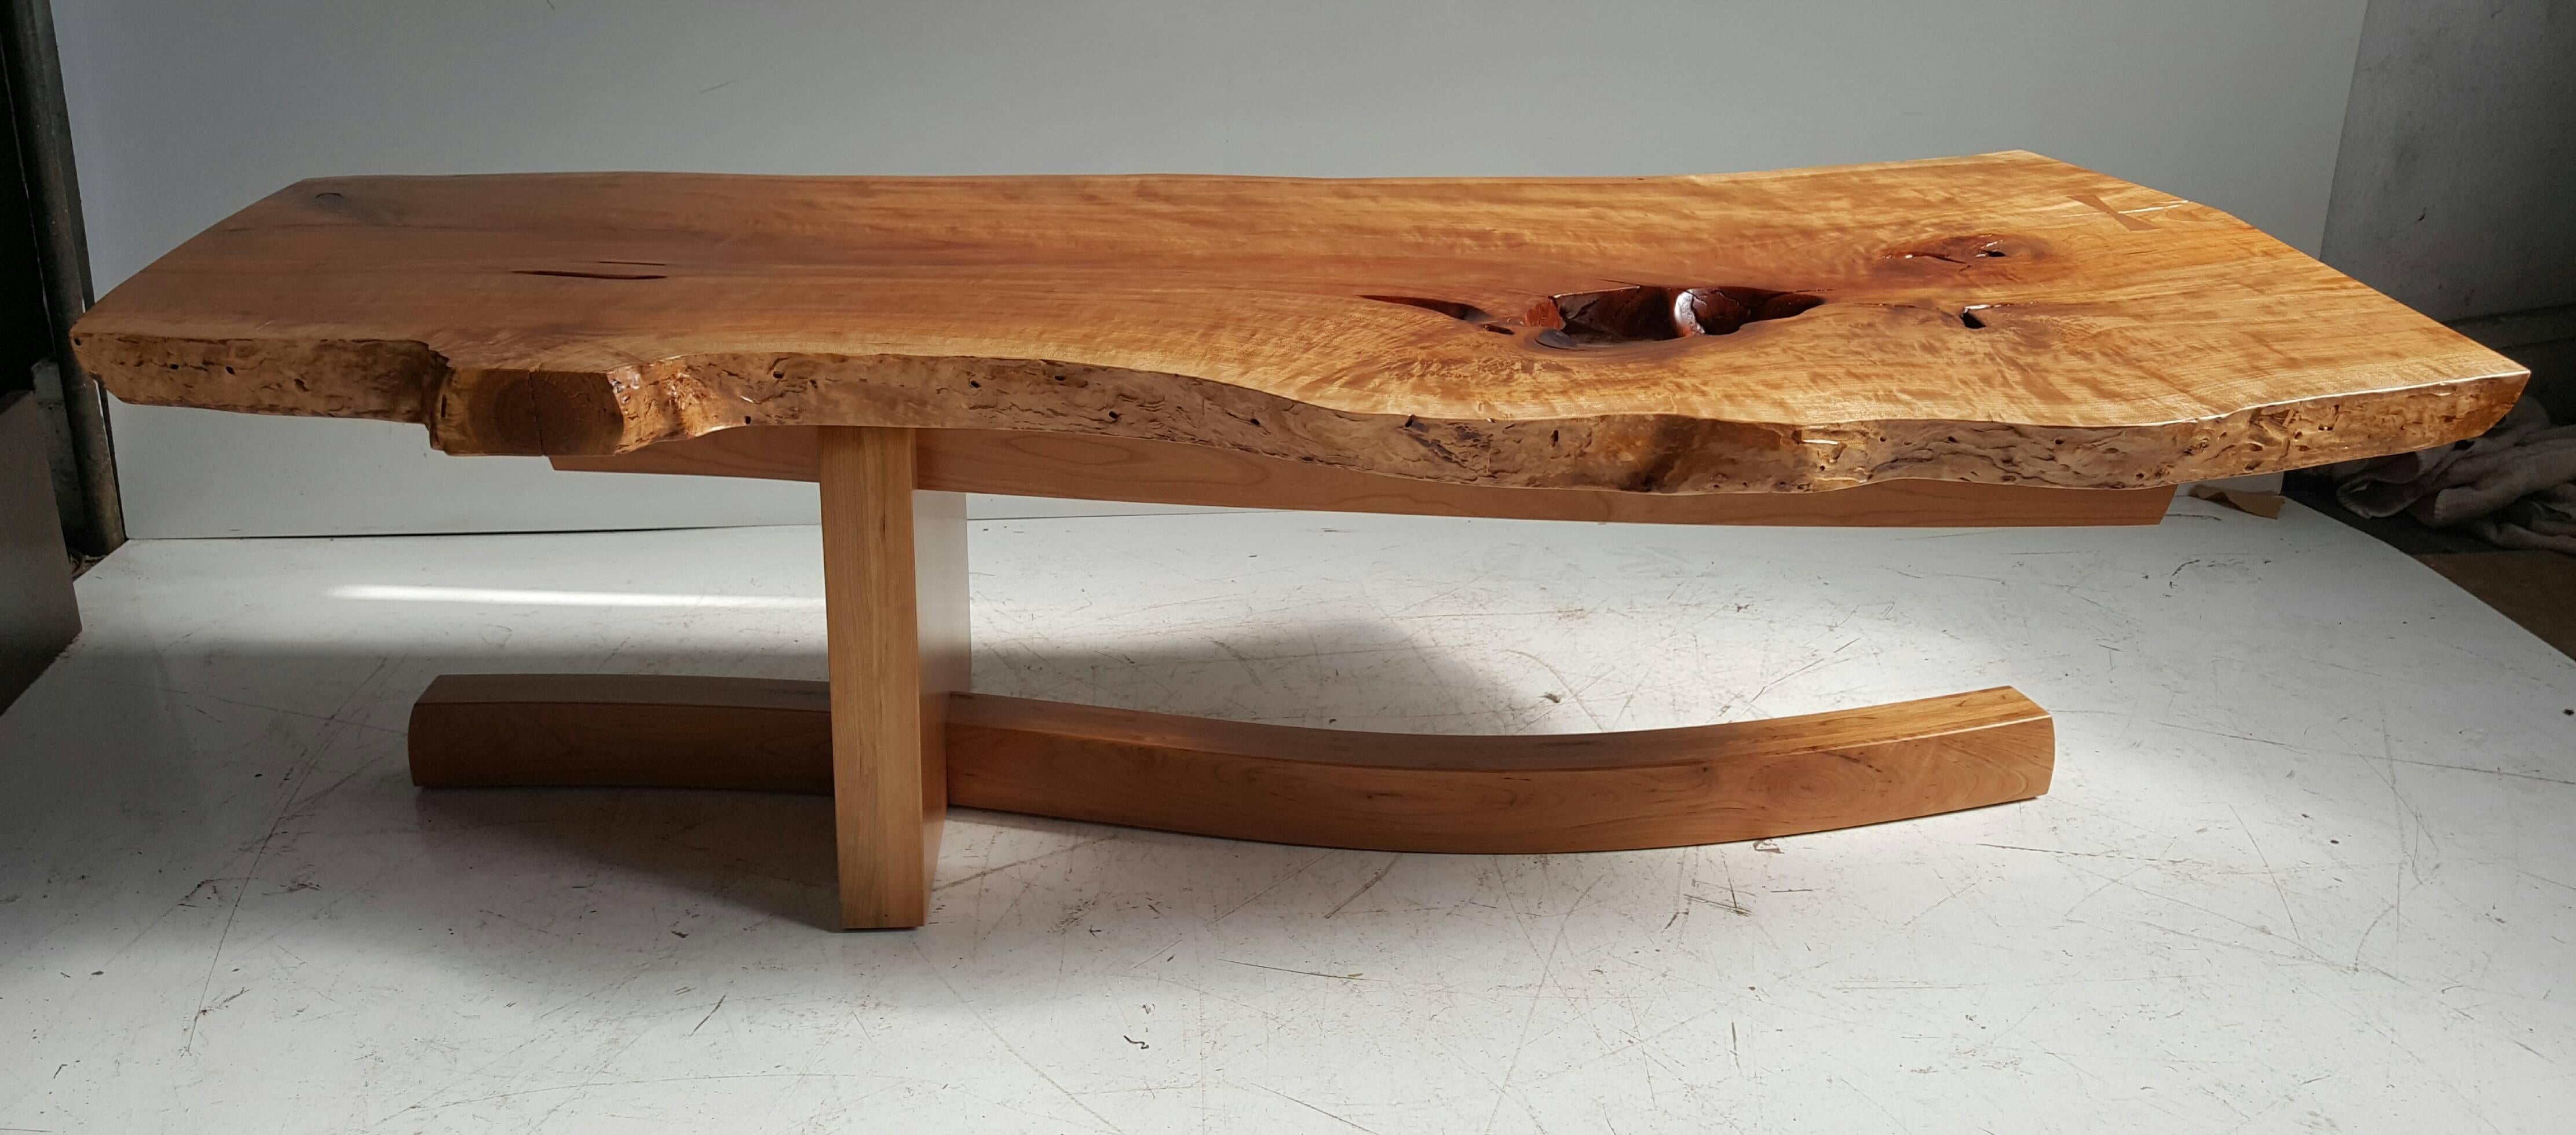 Table moderniste en merisier figuré, Griff Logan.
Expositions : 2013 arts council for wyoming county, Perry, NY, 